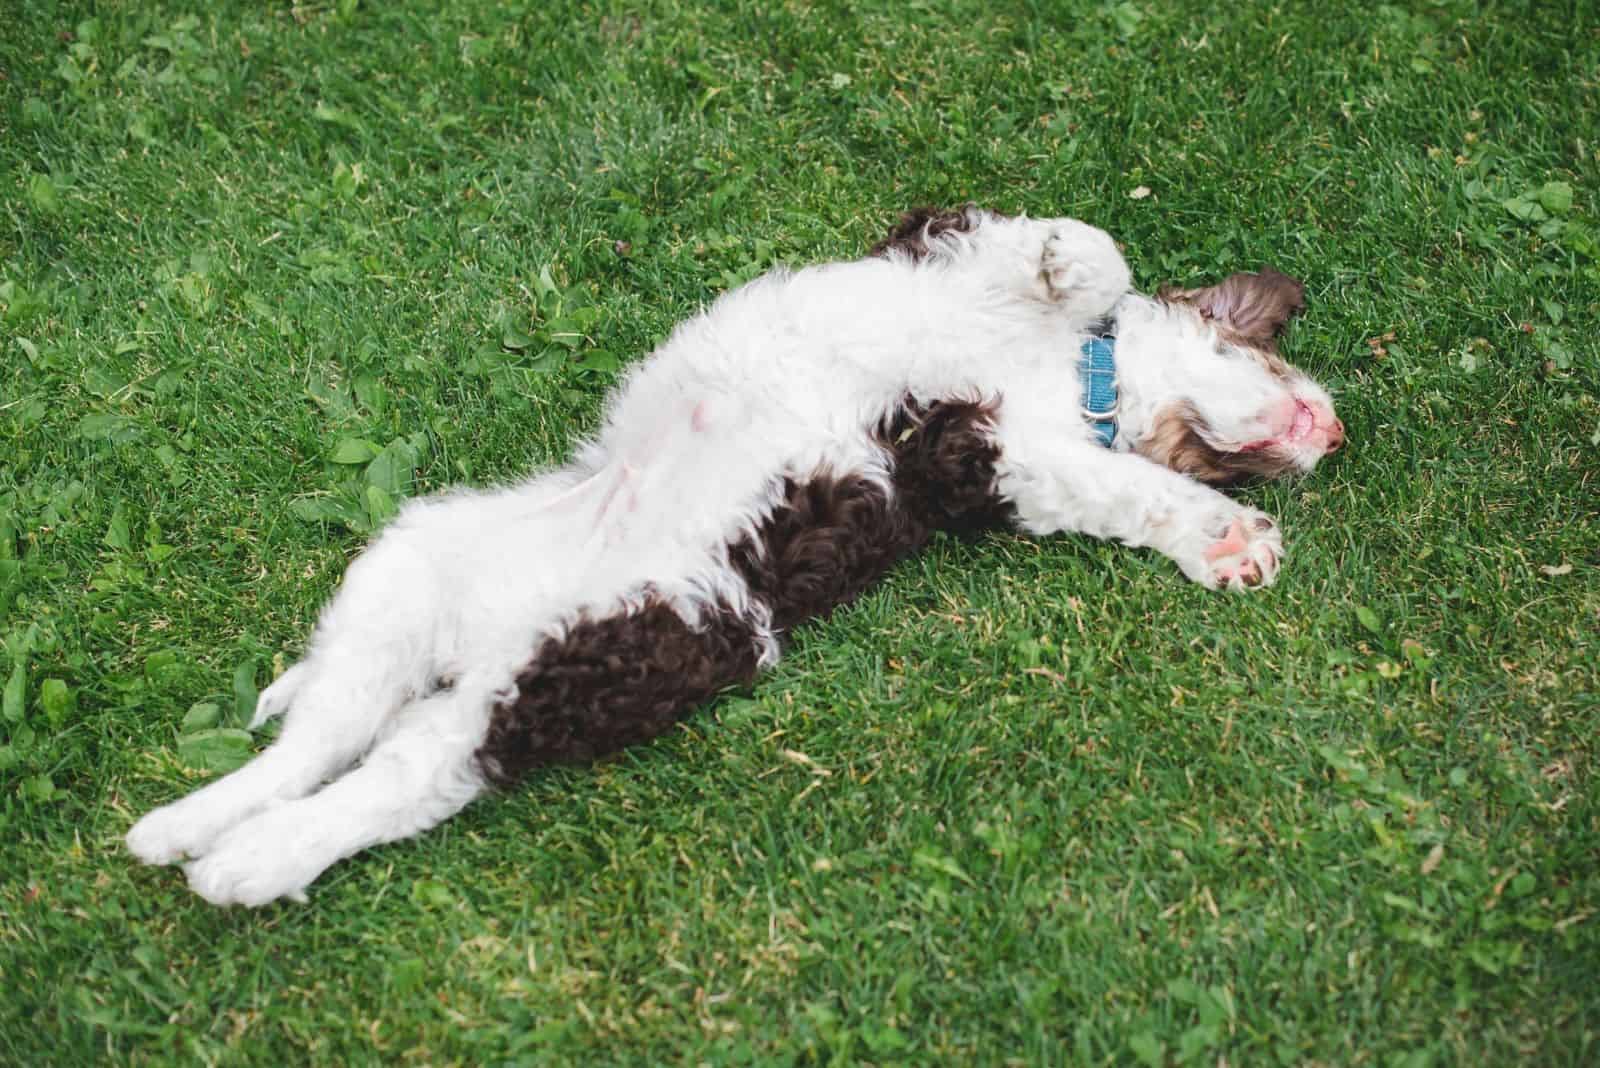 sable bernedoodle stretching and rolling in the grass lawn